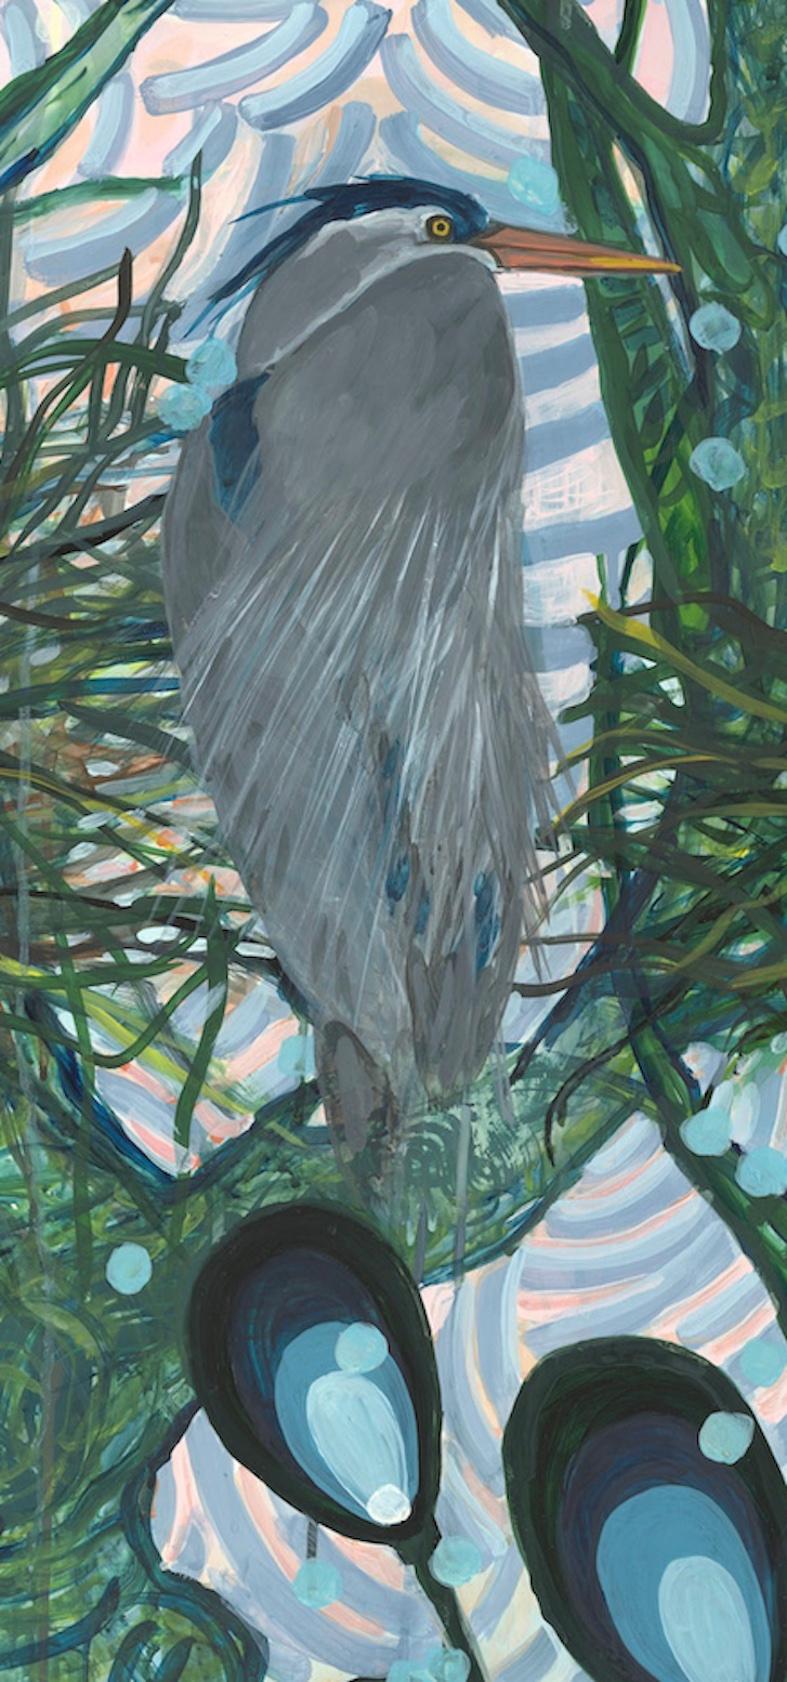  Large Nature Diptych Heron Rookery Watercolor & Acrylic on Mylar Greens, Blues  For Sale 3